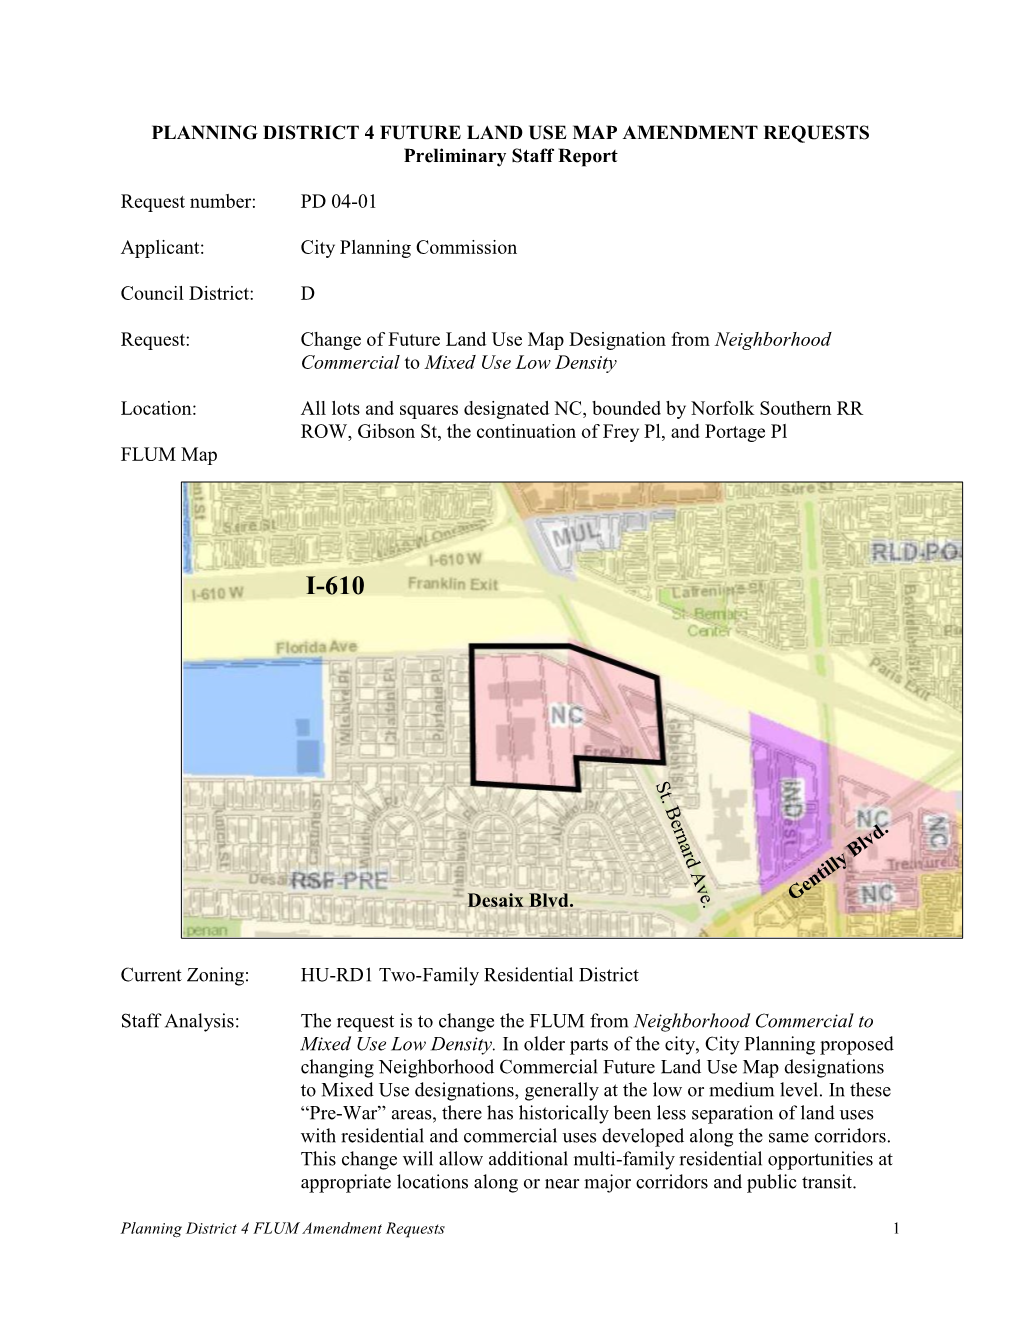 PLANNING DISTRICT 4 FUTURE LAND USE MAP AMENDMENT REQUESTS Preliminary Staff Report Request Number